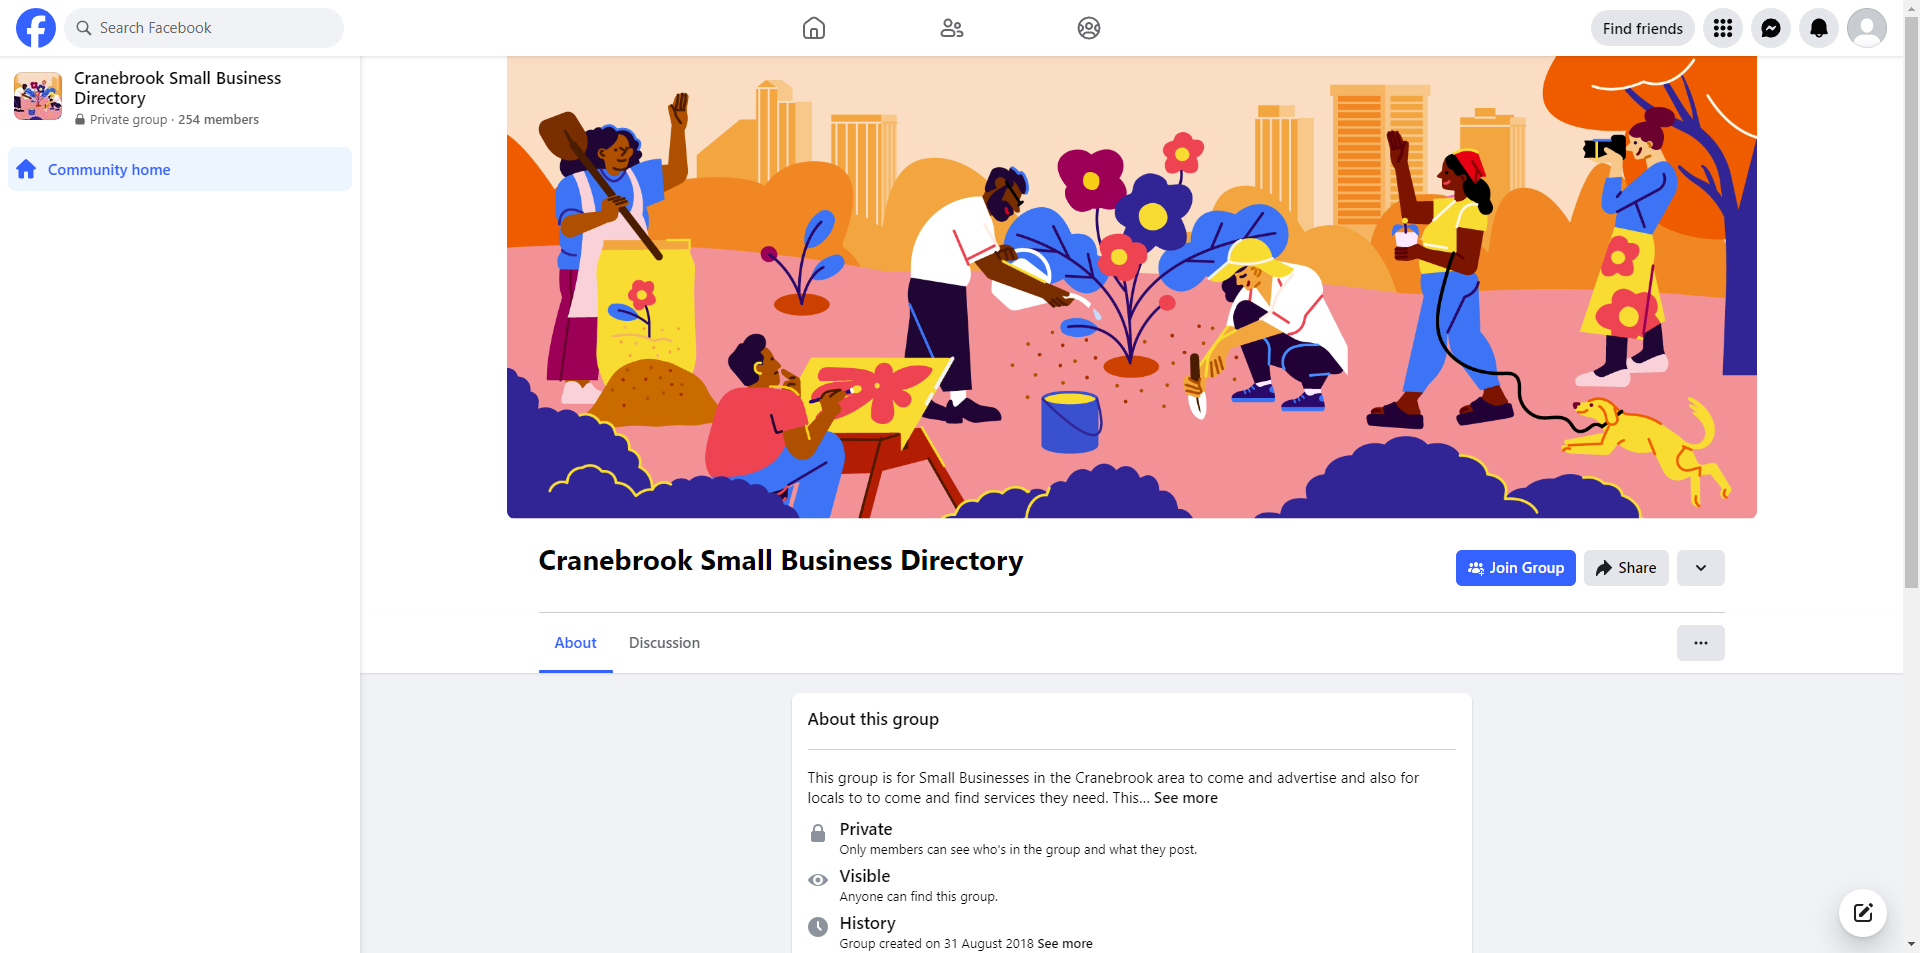 Cranbrook Small Business Directory